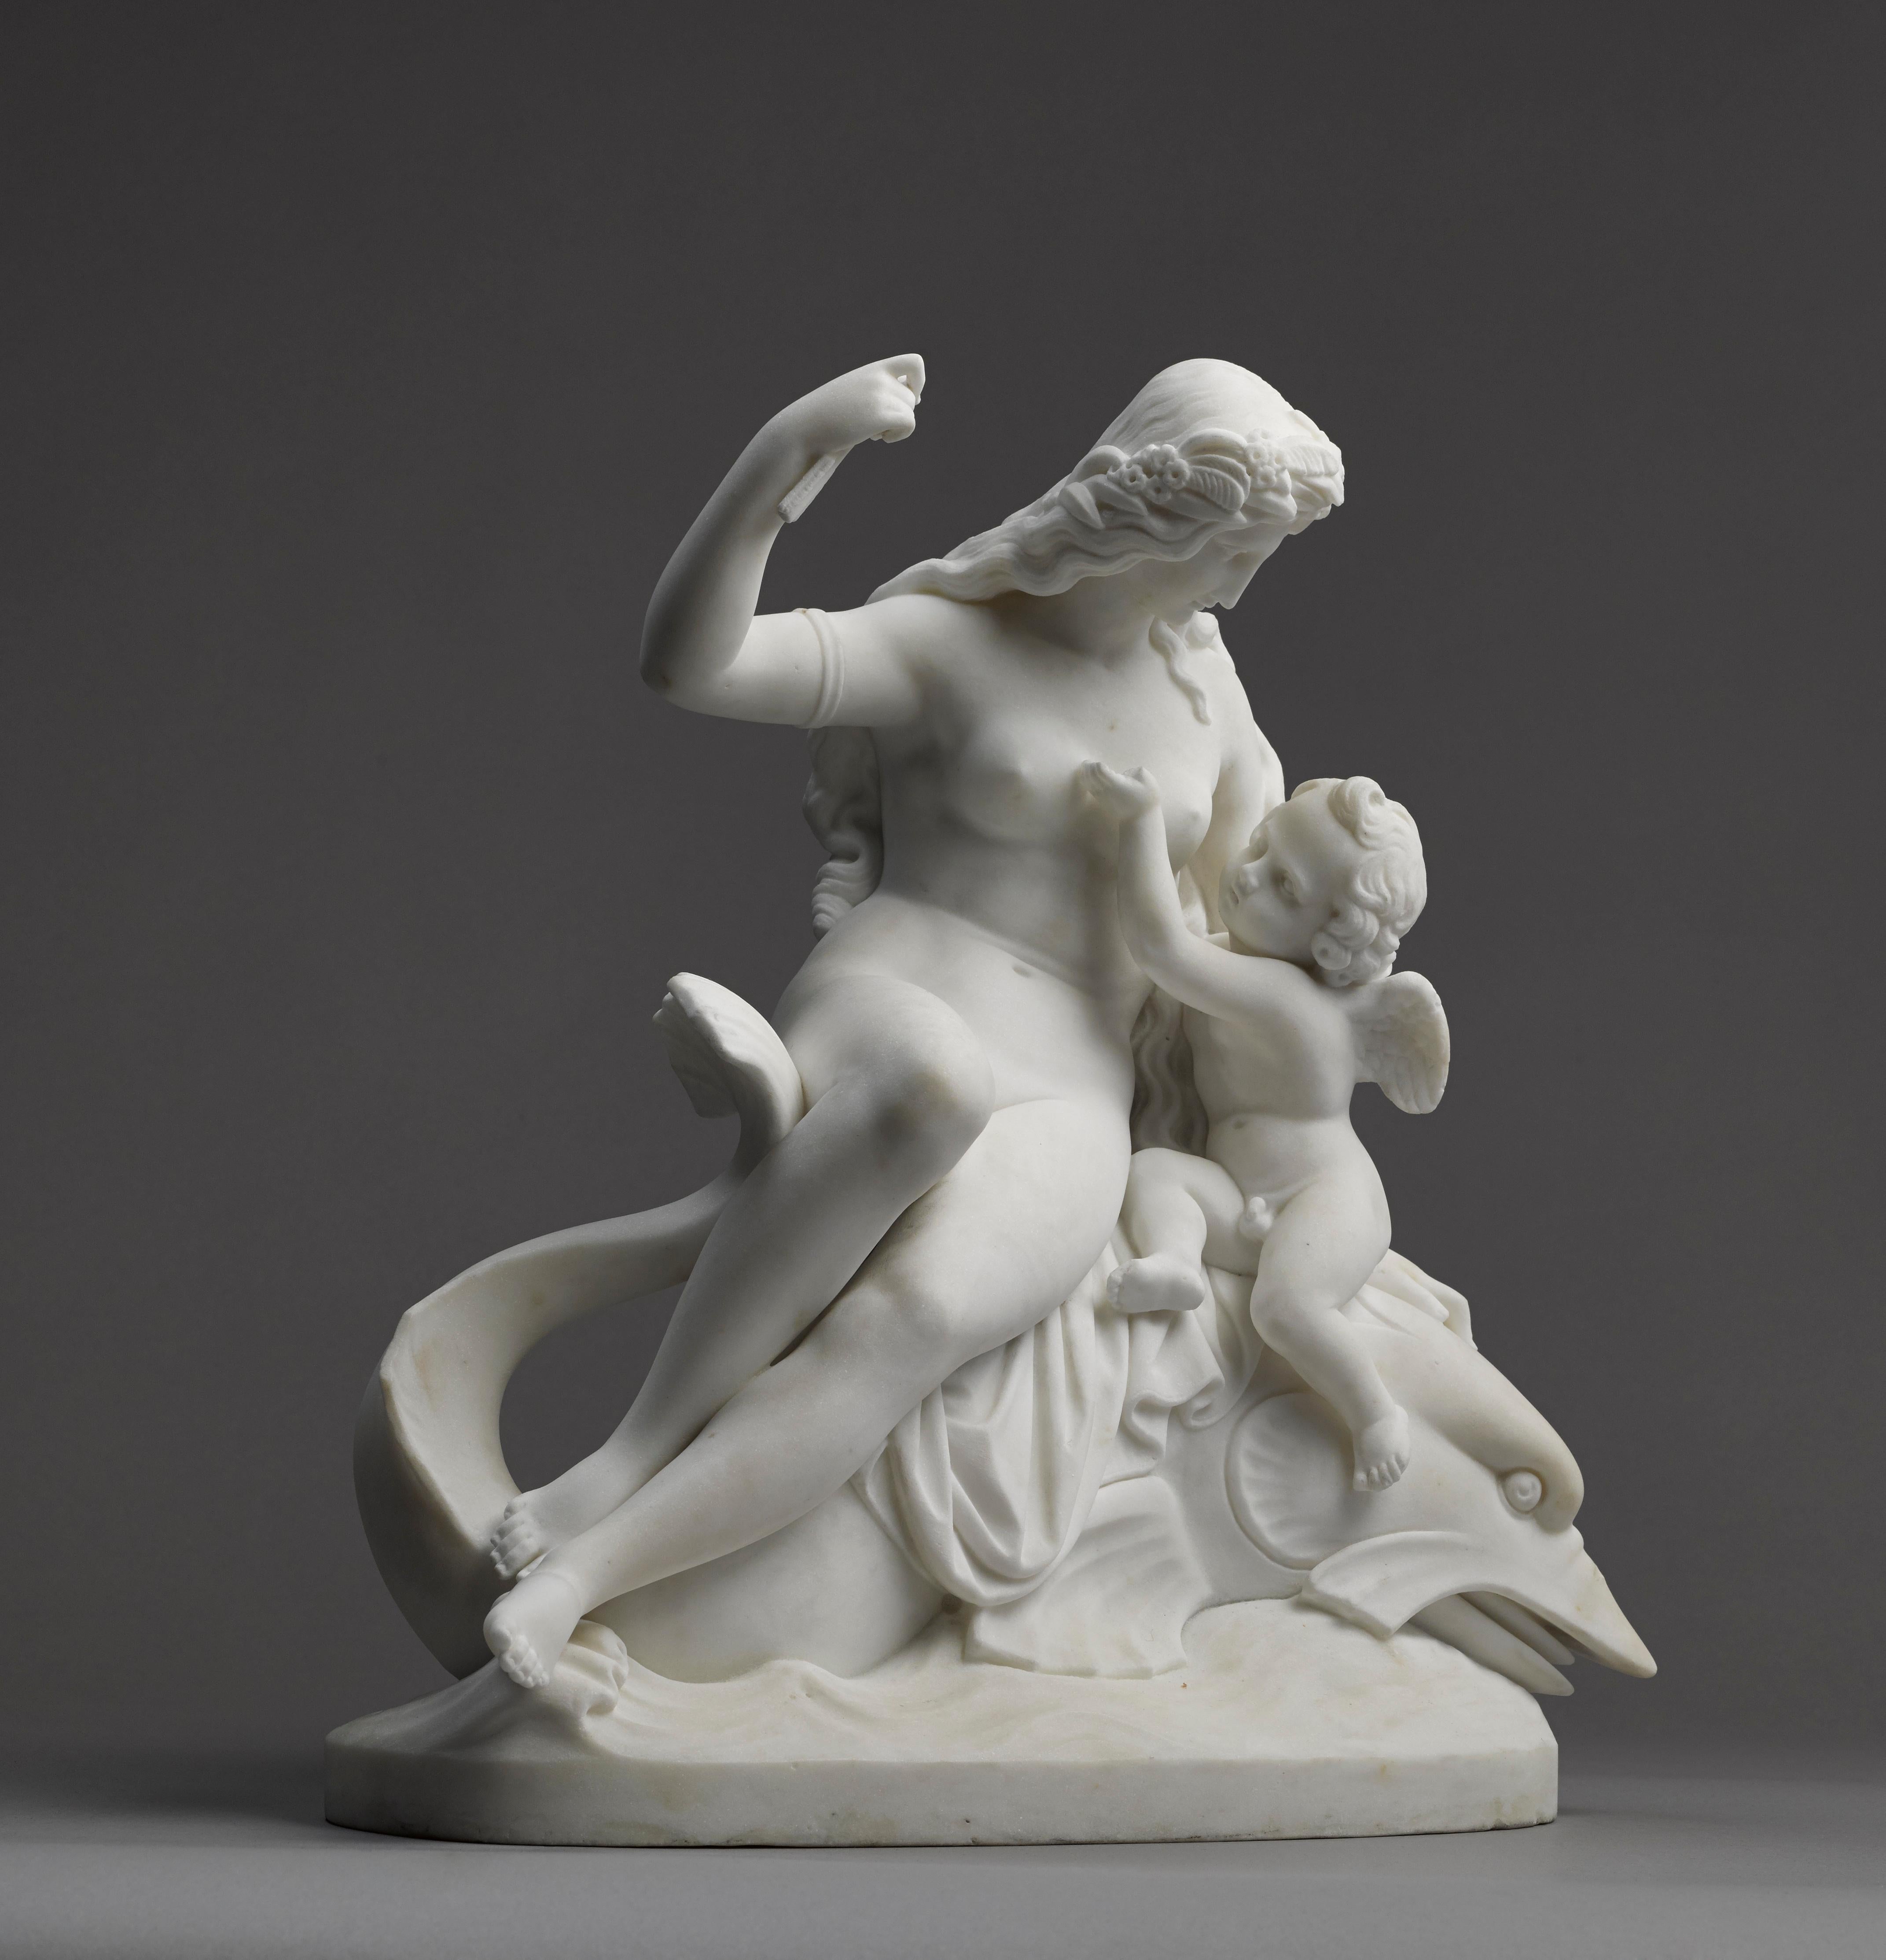 Ludwig Schwanthaler (Munich 1802-1848), was one of the most important and influential sculptors in Munich of the 19th century and one of the founders of the modern Romantic school of sculpture.

He first trained with his father and then